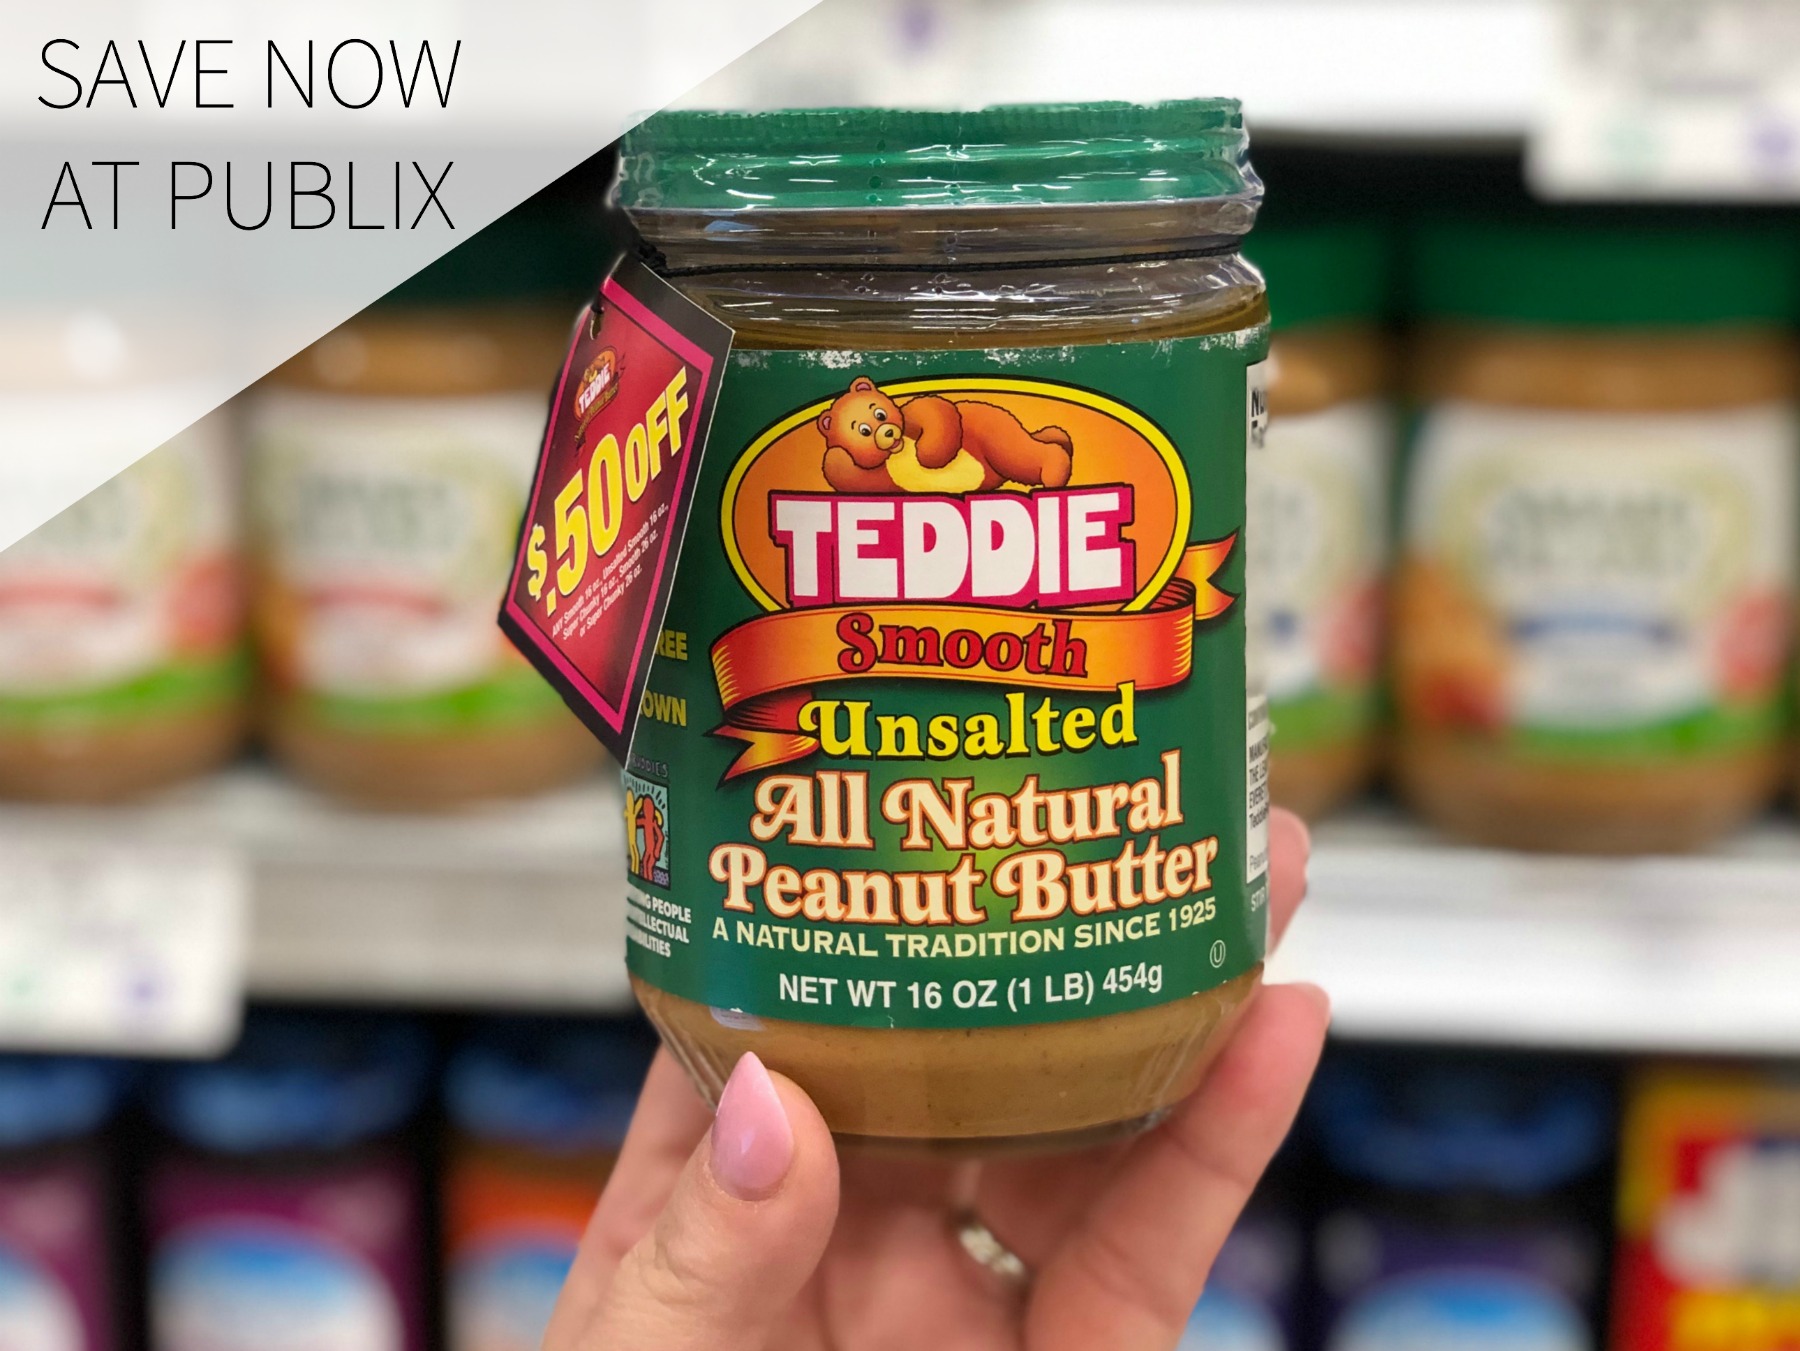 Save On Teddie All Natural Peanut Butter Through 5/10 At Your Local Publix 2